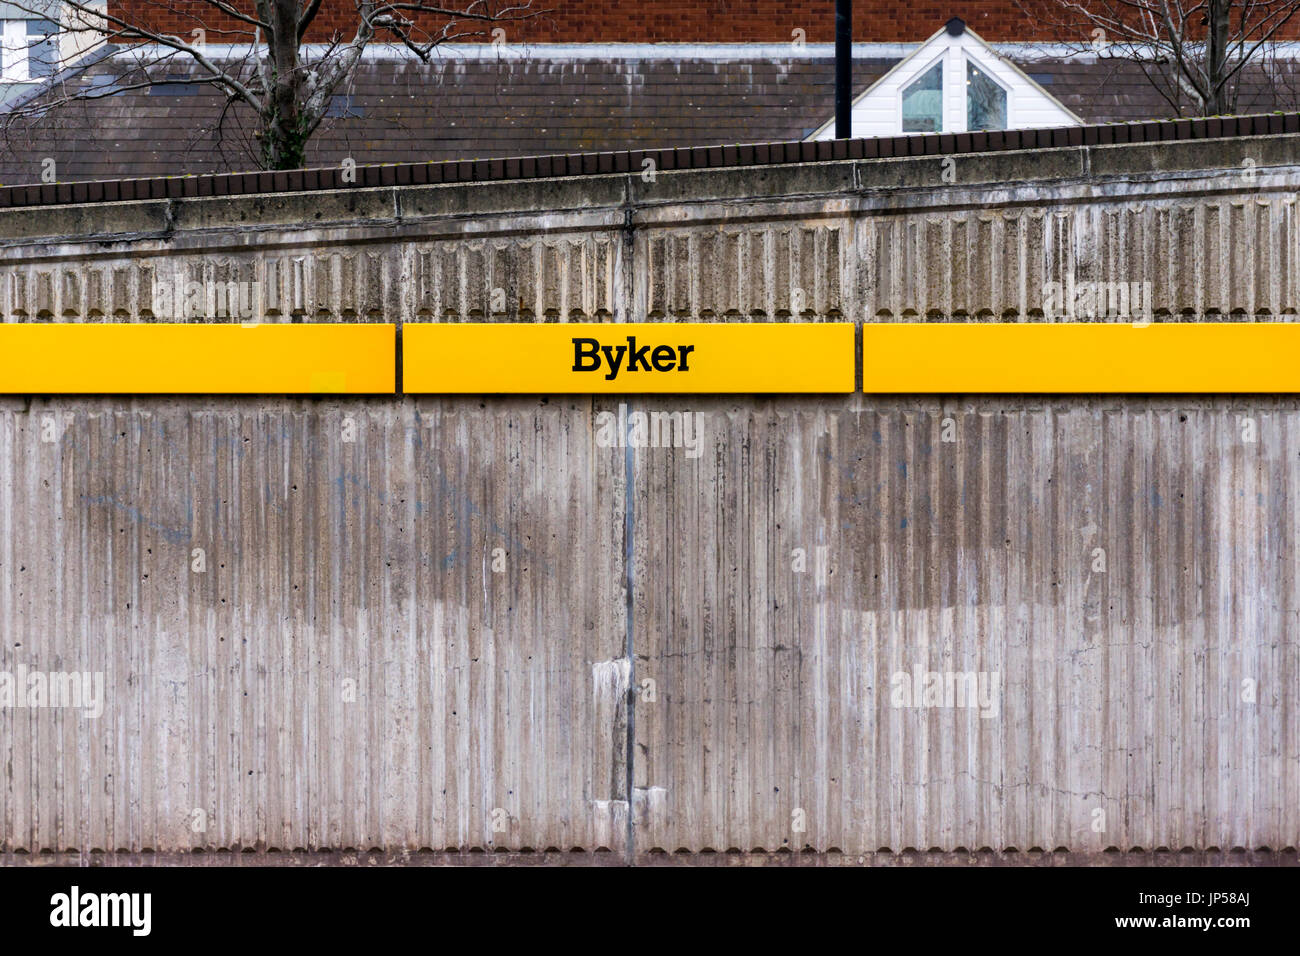 Sign for Byker station on Tyne and Wear Metro system Stock Photo